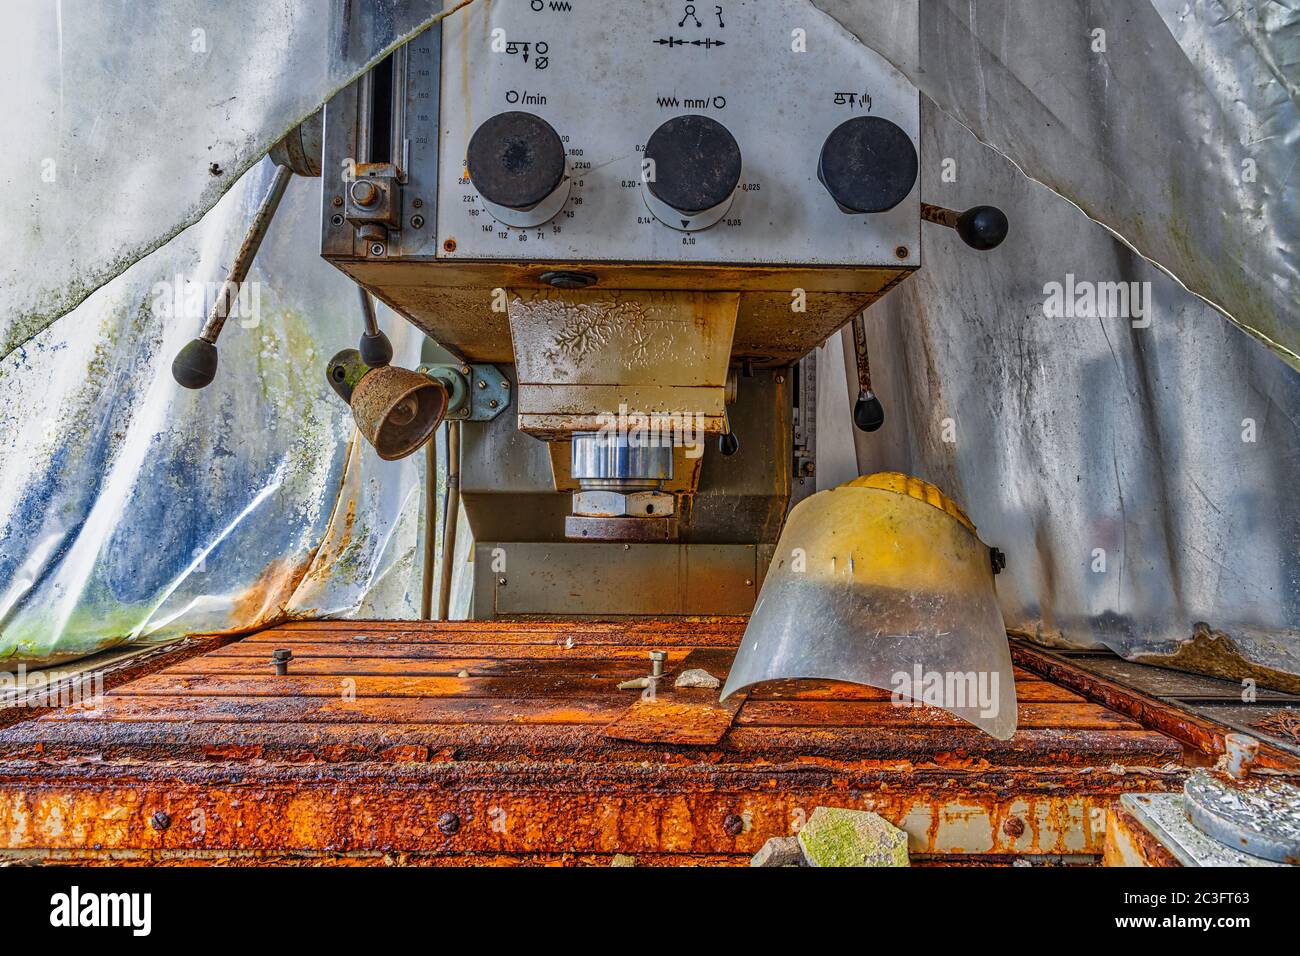 Lost Places old machine rusting away Stock Photo